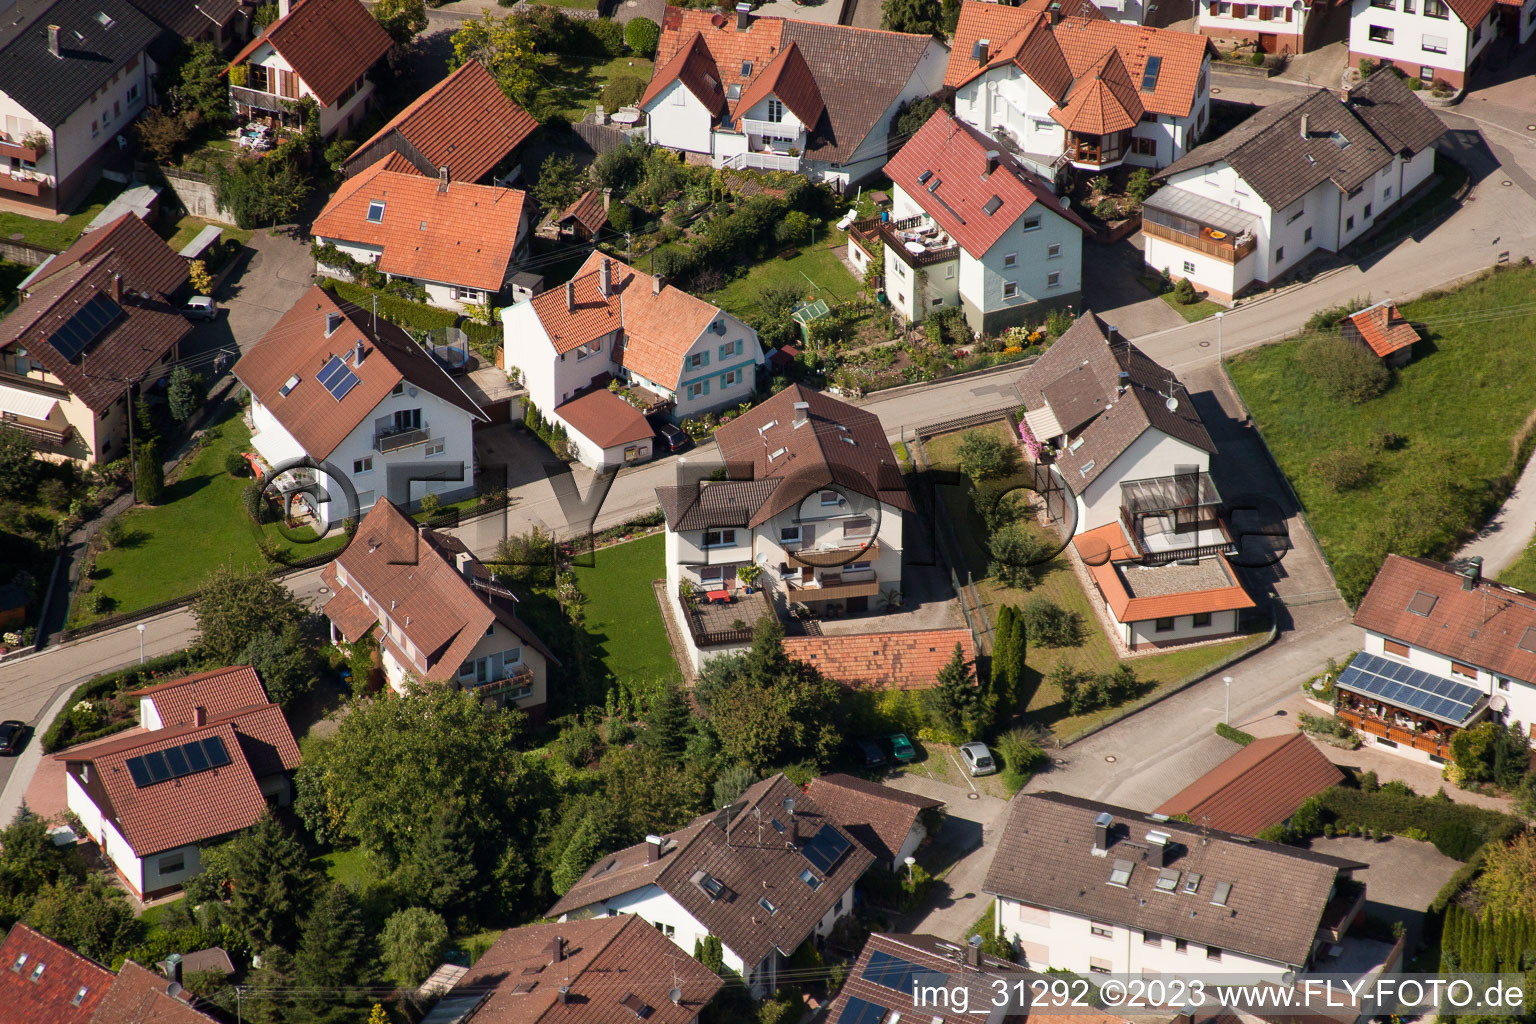 District Gallenbach in Baden-Baden in the state Baden-Wuerttemberg, Germany seen from above